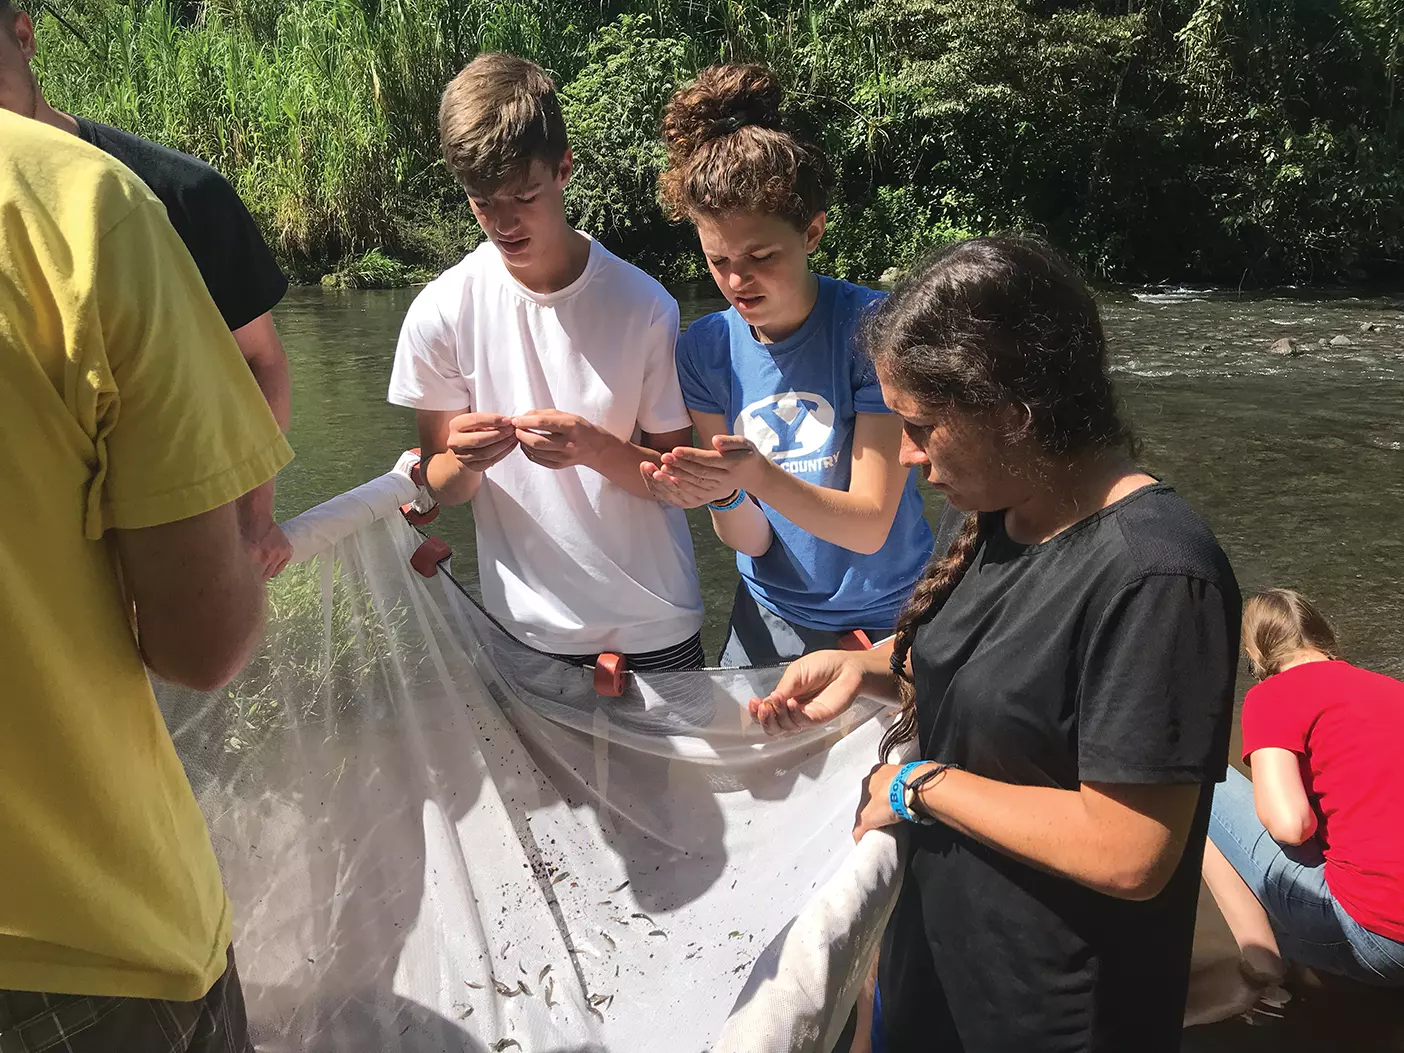 BYU students gather data on fish in Costa Rica.